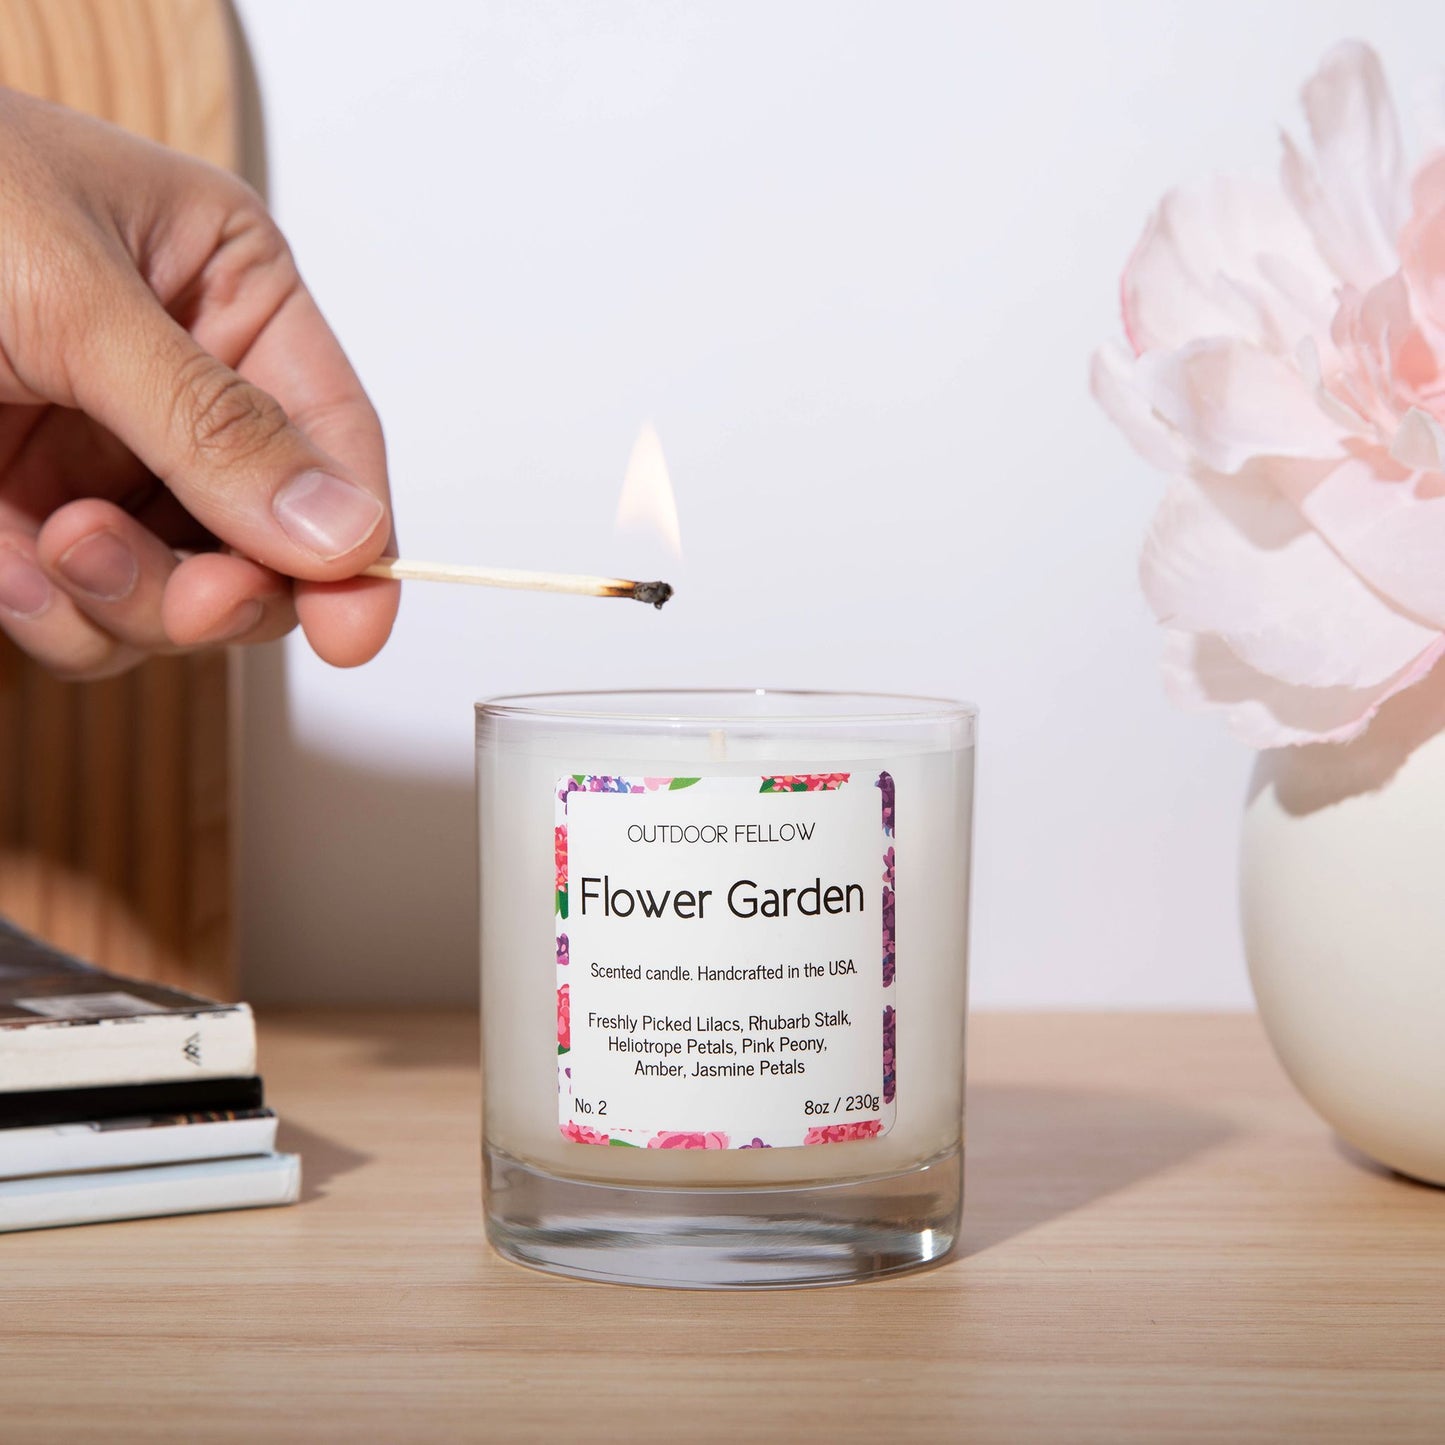 Flower Garden scented candle about to be lit